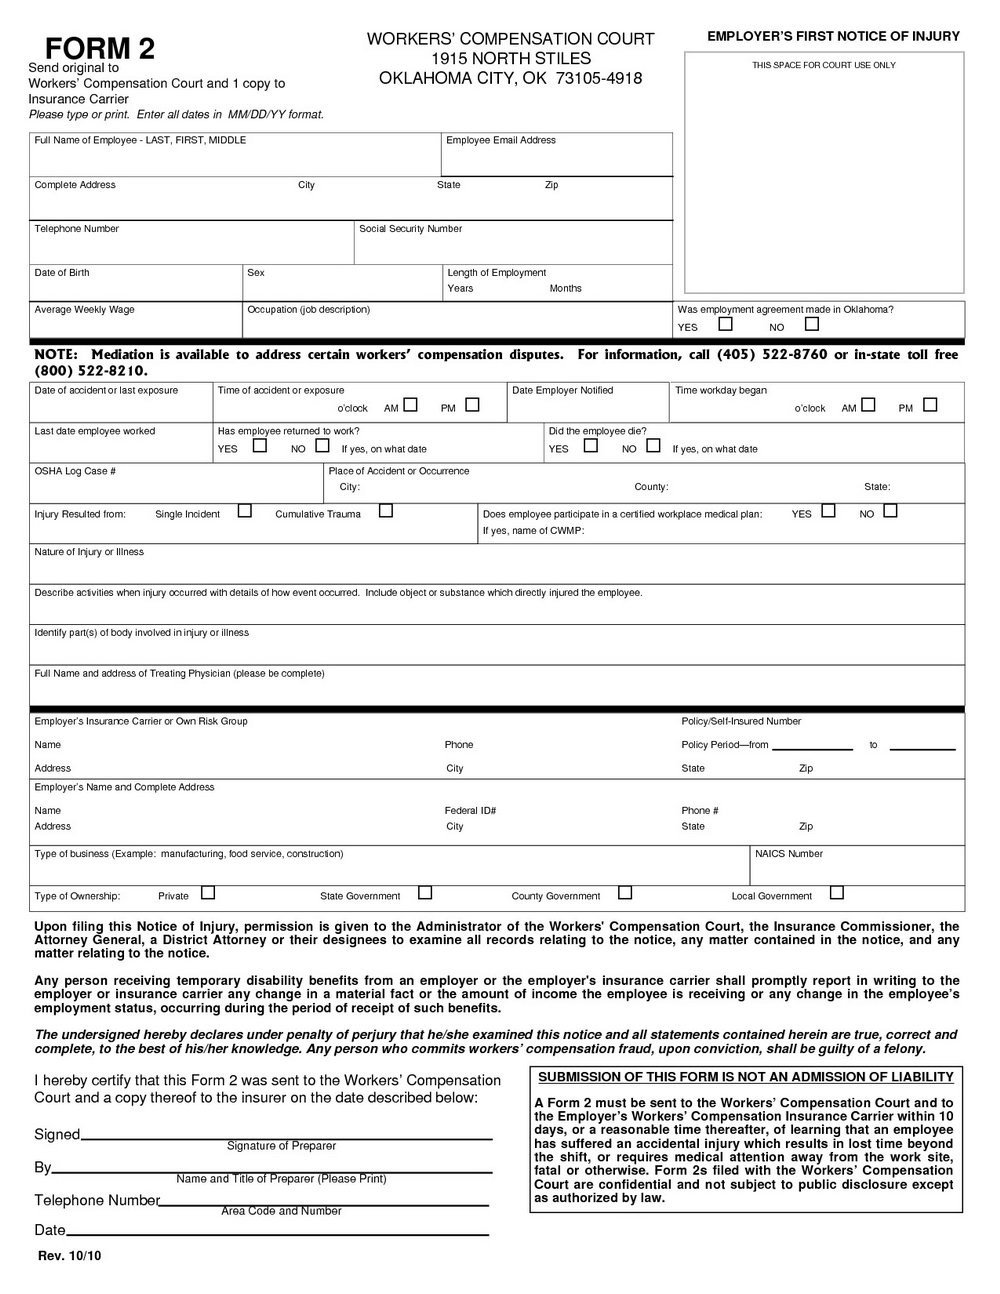 Workers pensation Waiver Form Forms 6117